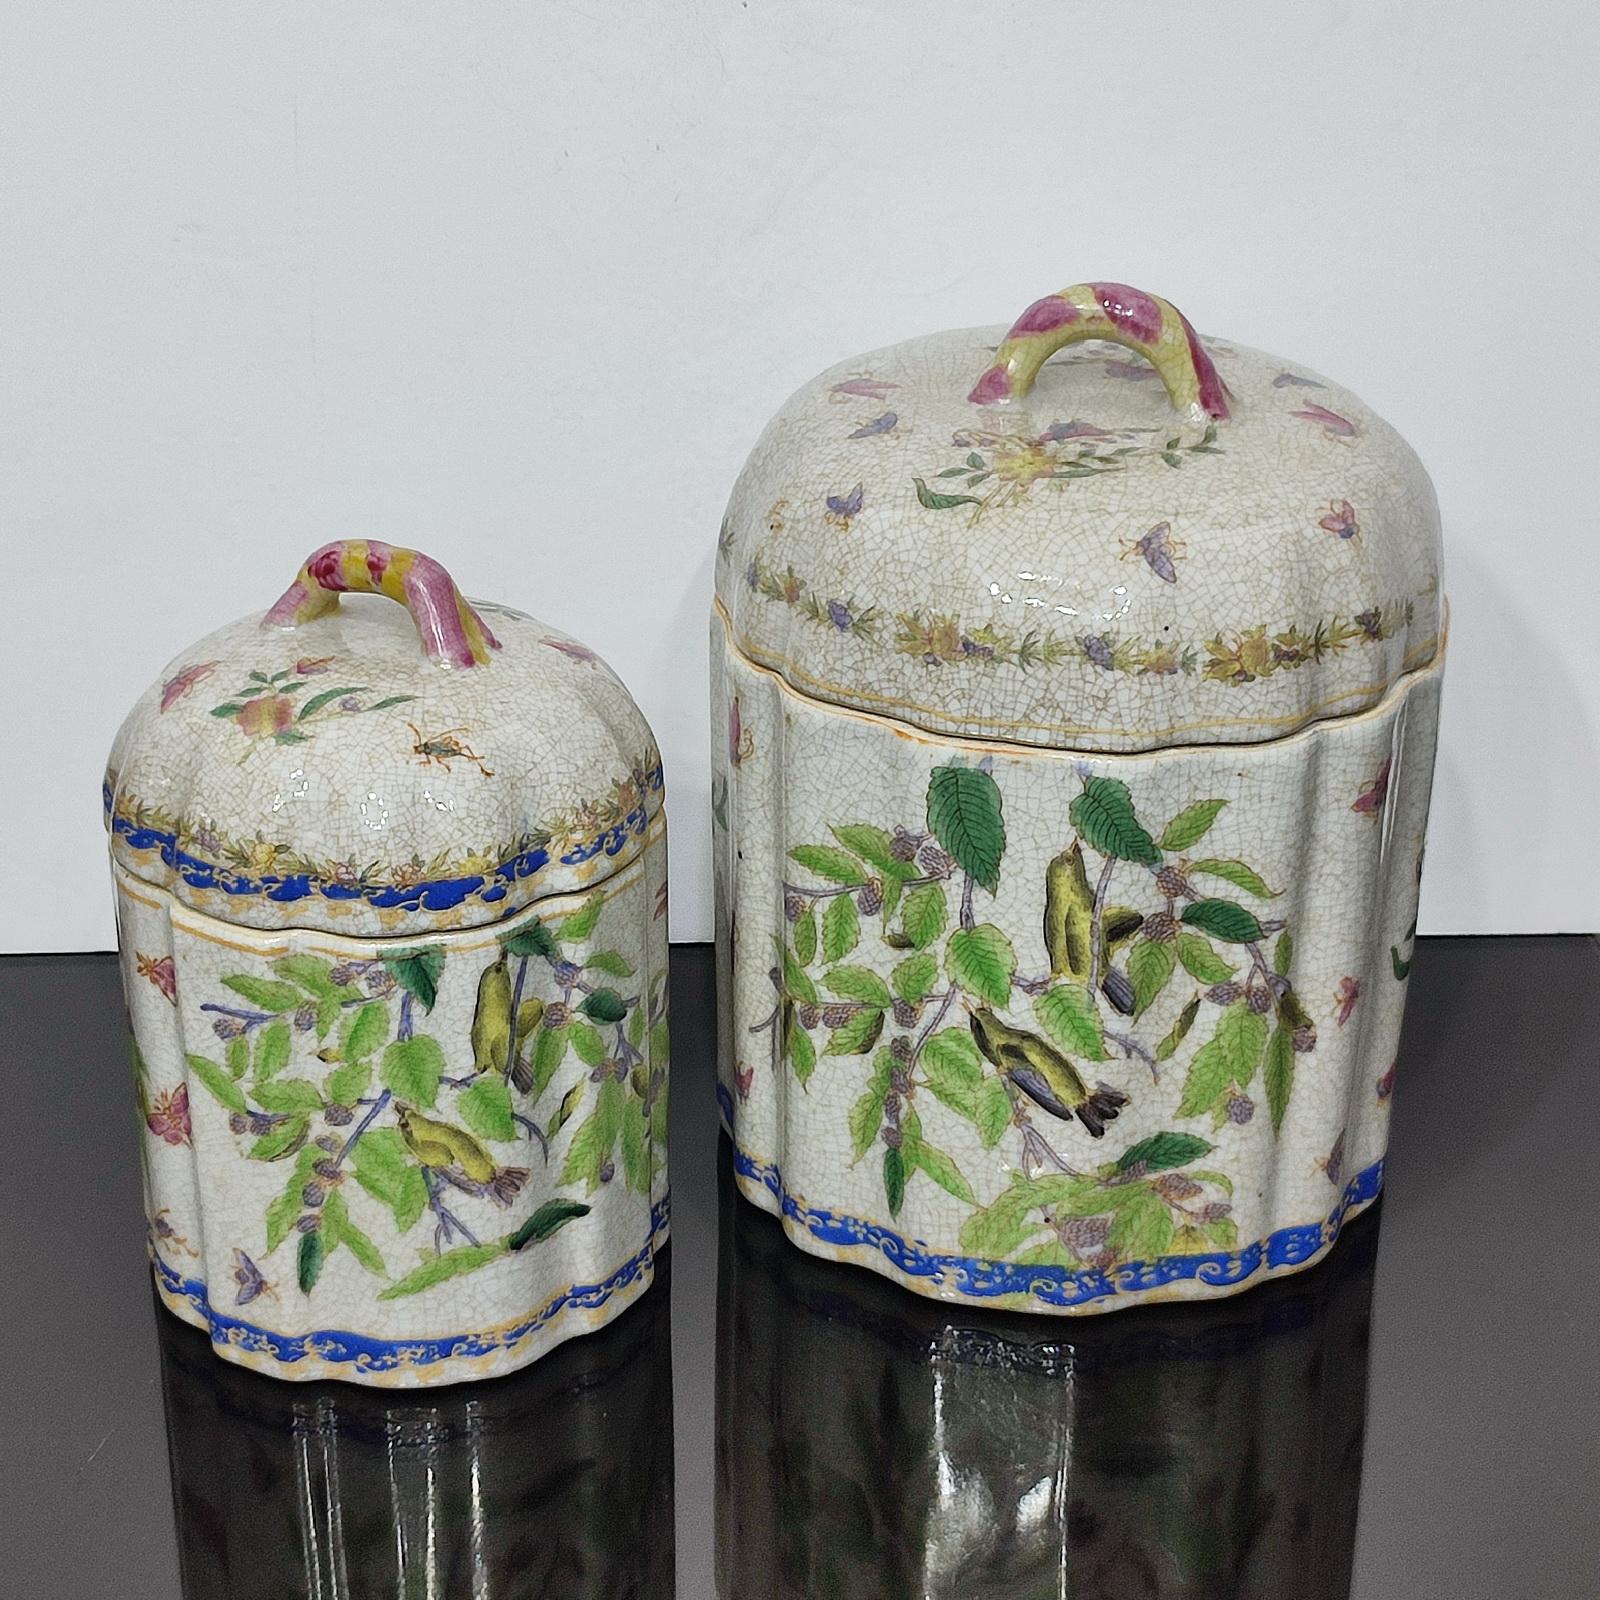 Porcelain Pair of Craqueled Ceramic Lidded Jars, Vintage from the 1990s - FREE SHIPPING For Sale